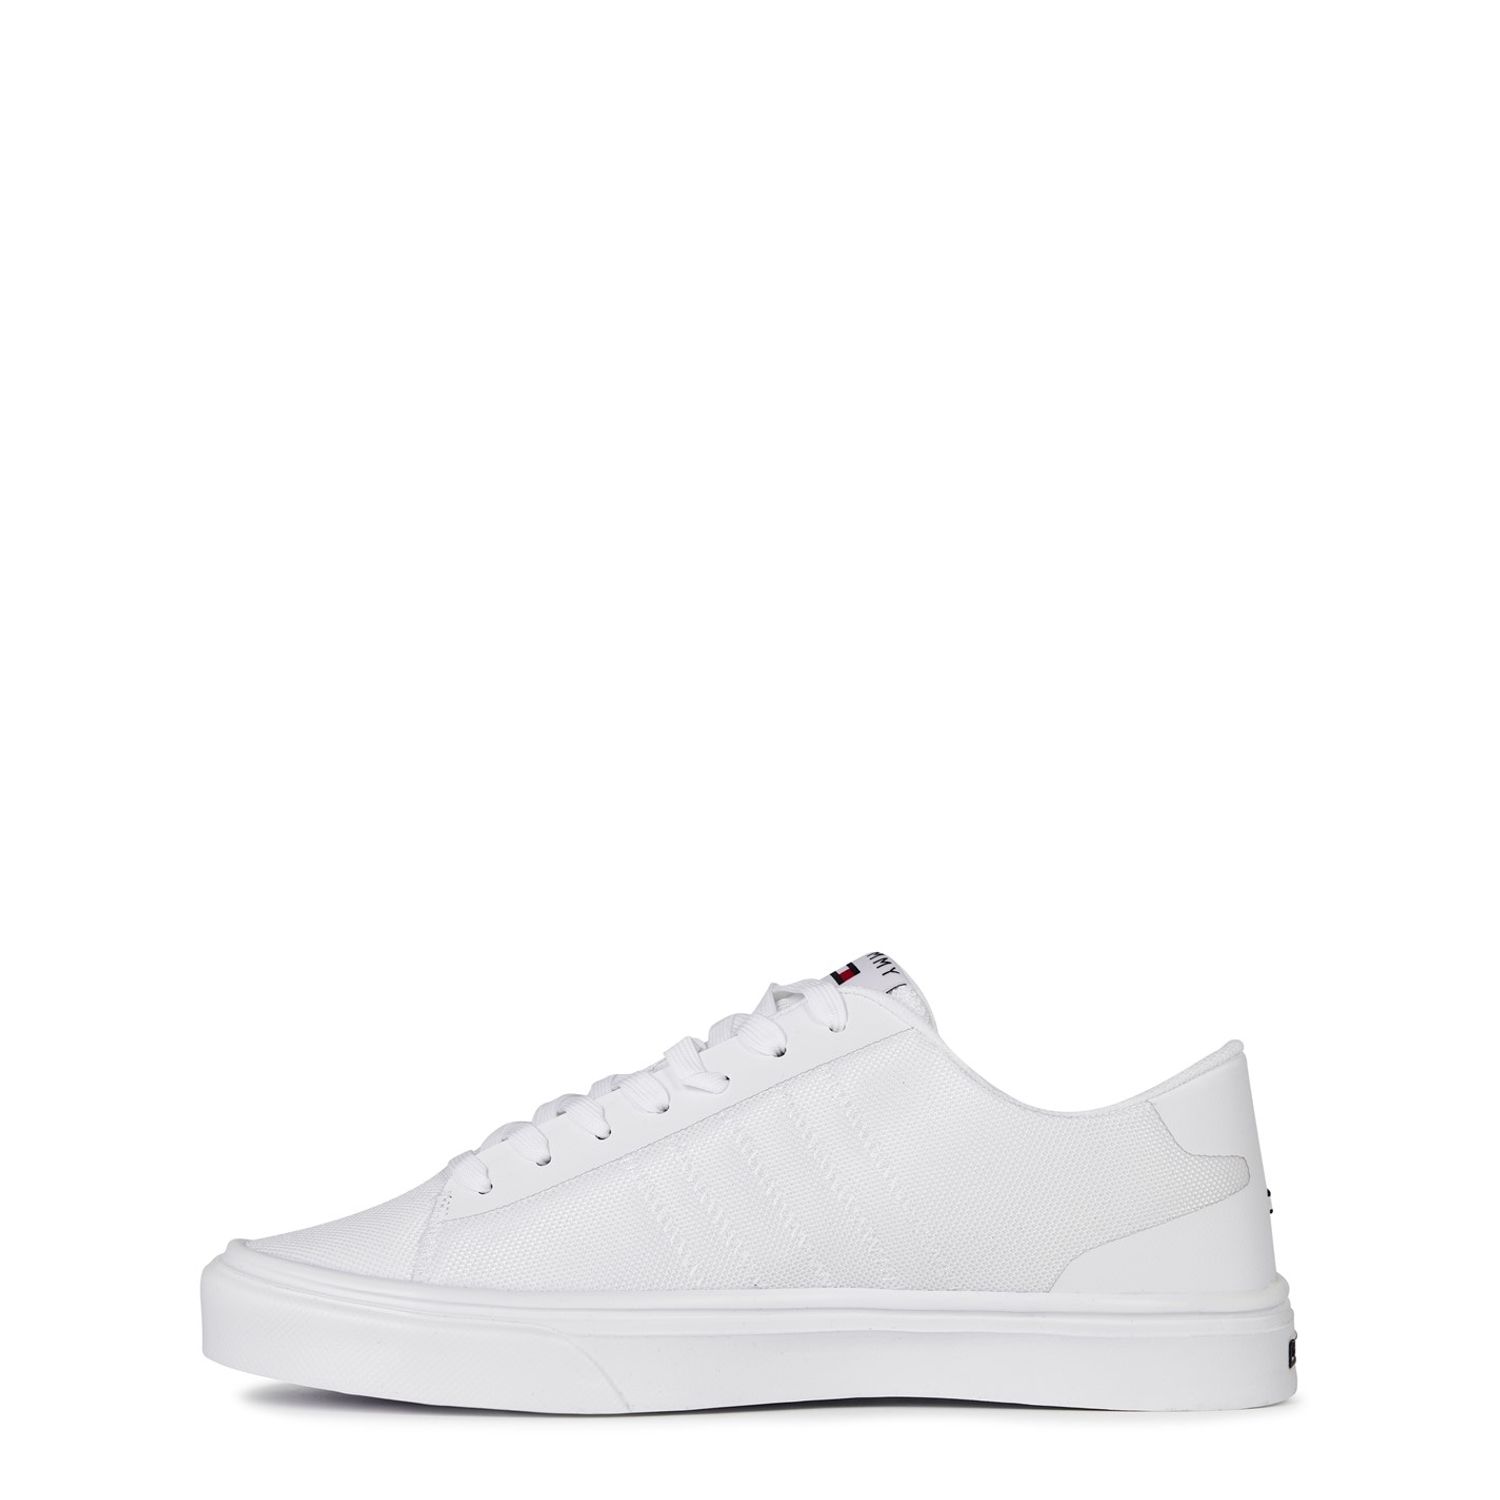 White Tommy Hilfiger Malc Knit Trainers - Get The Label